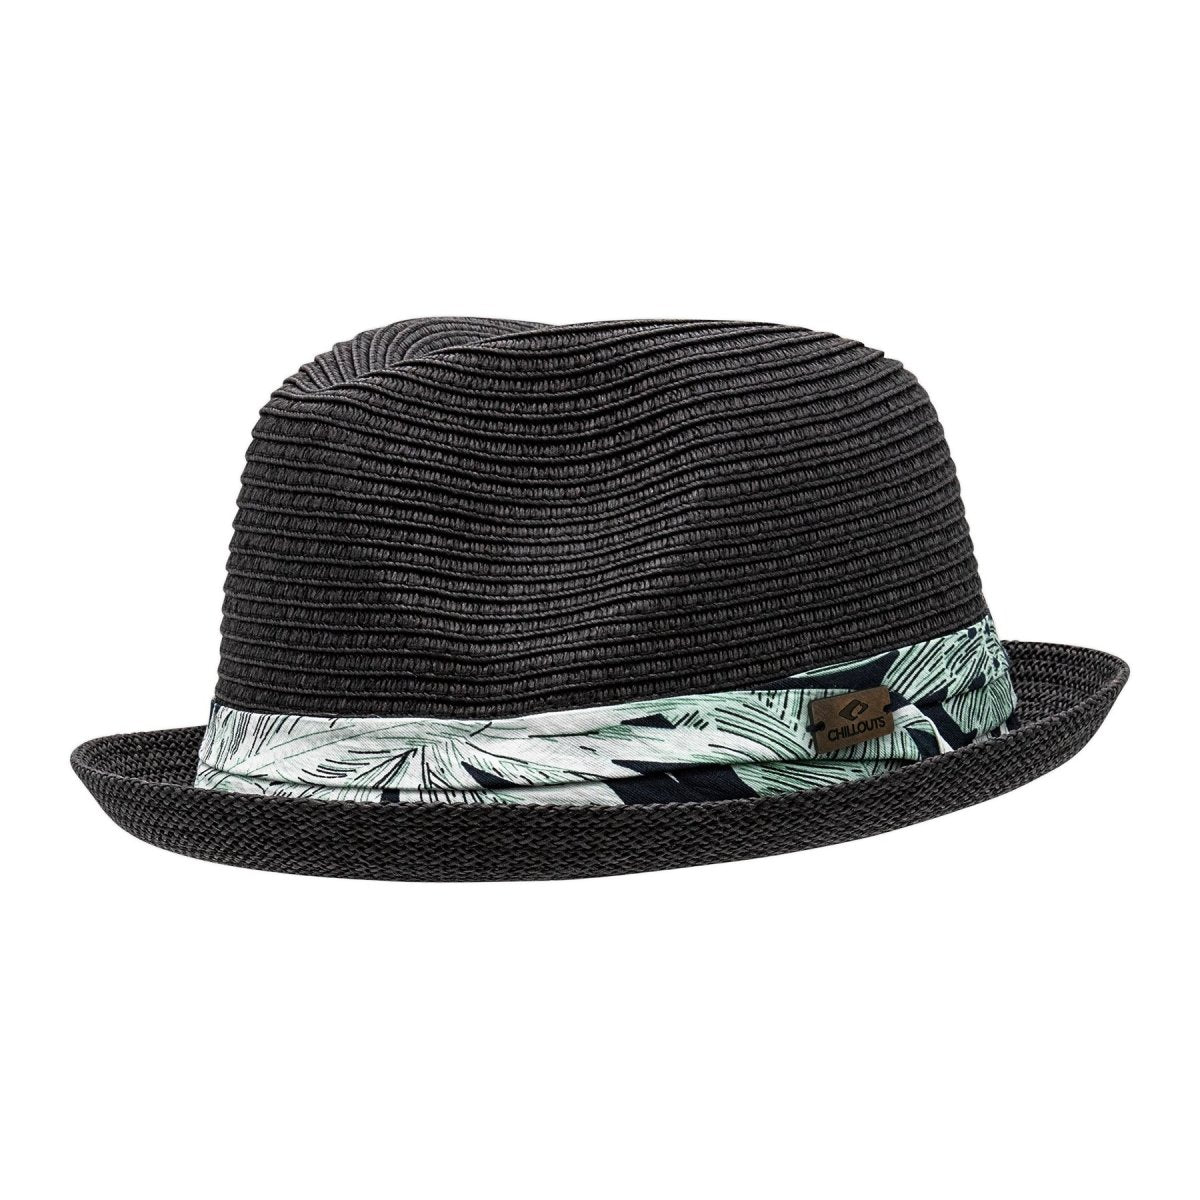 buy pie Chillouts now hat men band - for Headwear patterned online with Pork a –